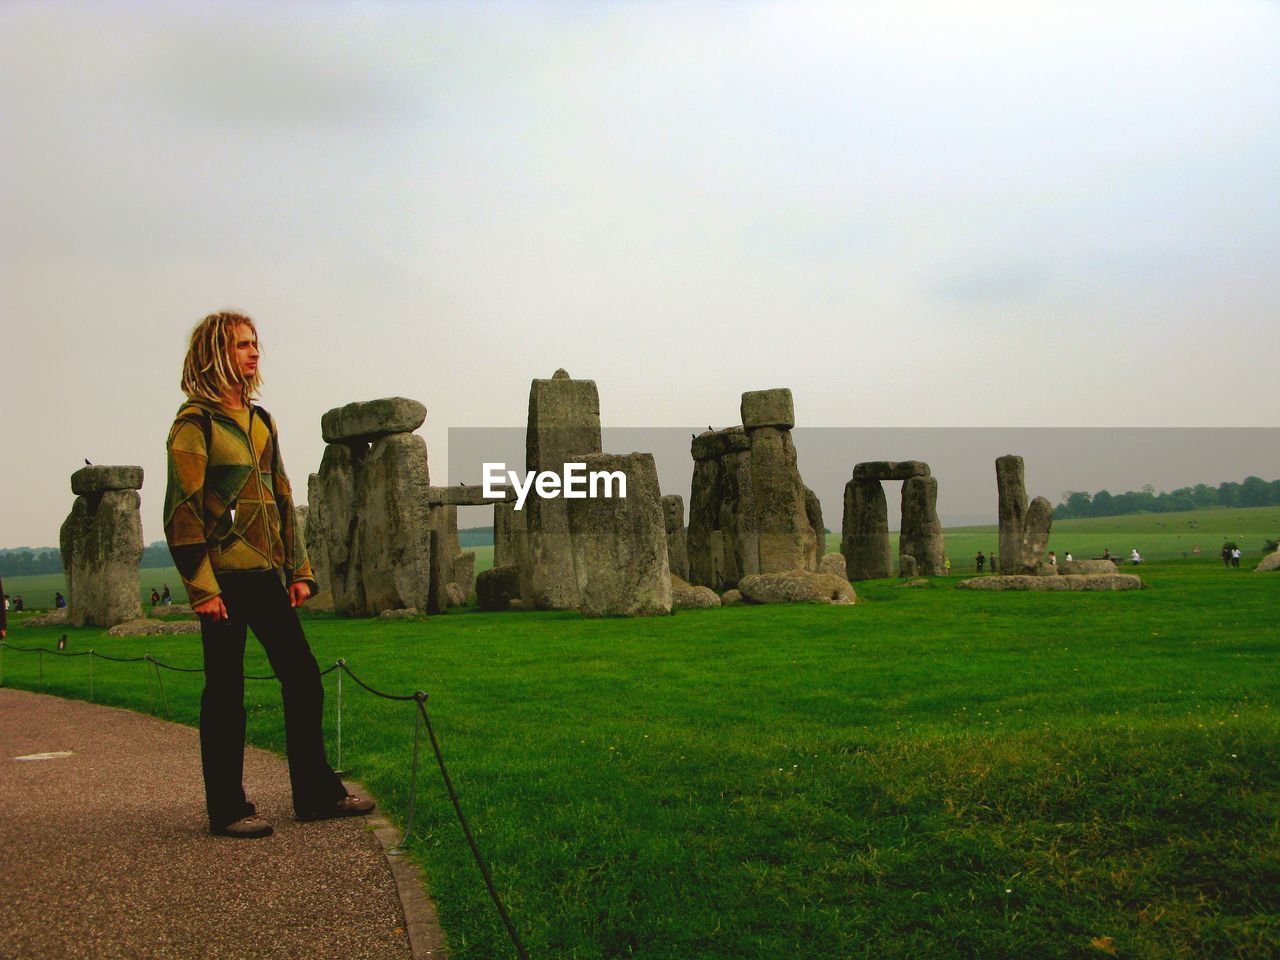 Young man with blonde dreadlocks at stonehenge.